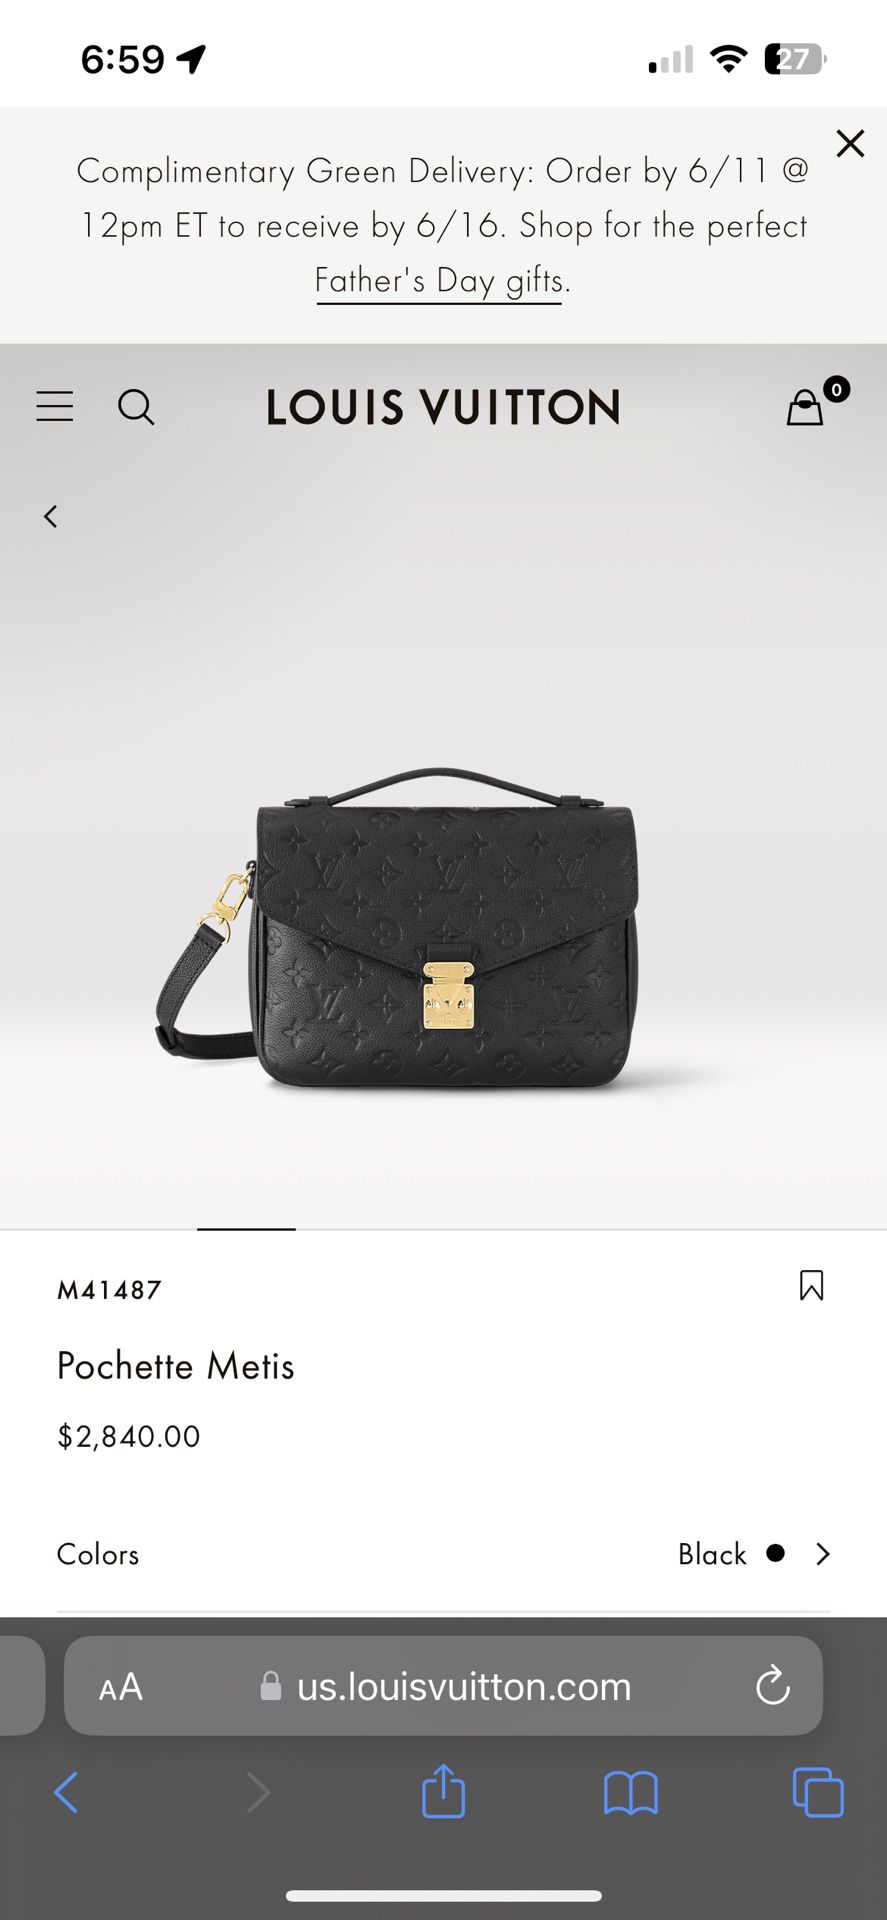 Louis Vuitton Pochette Metis Bag for Sale in Redwood City, CA - OfferUp